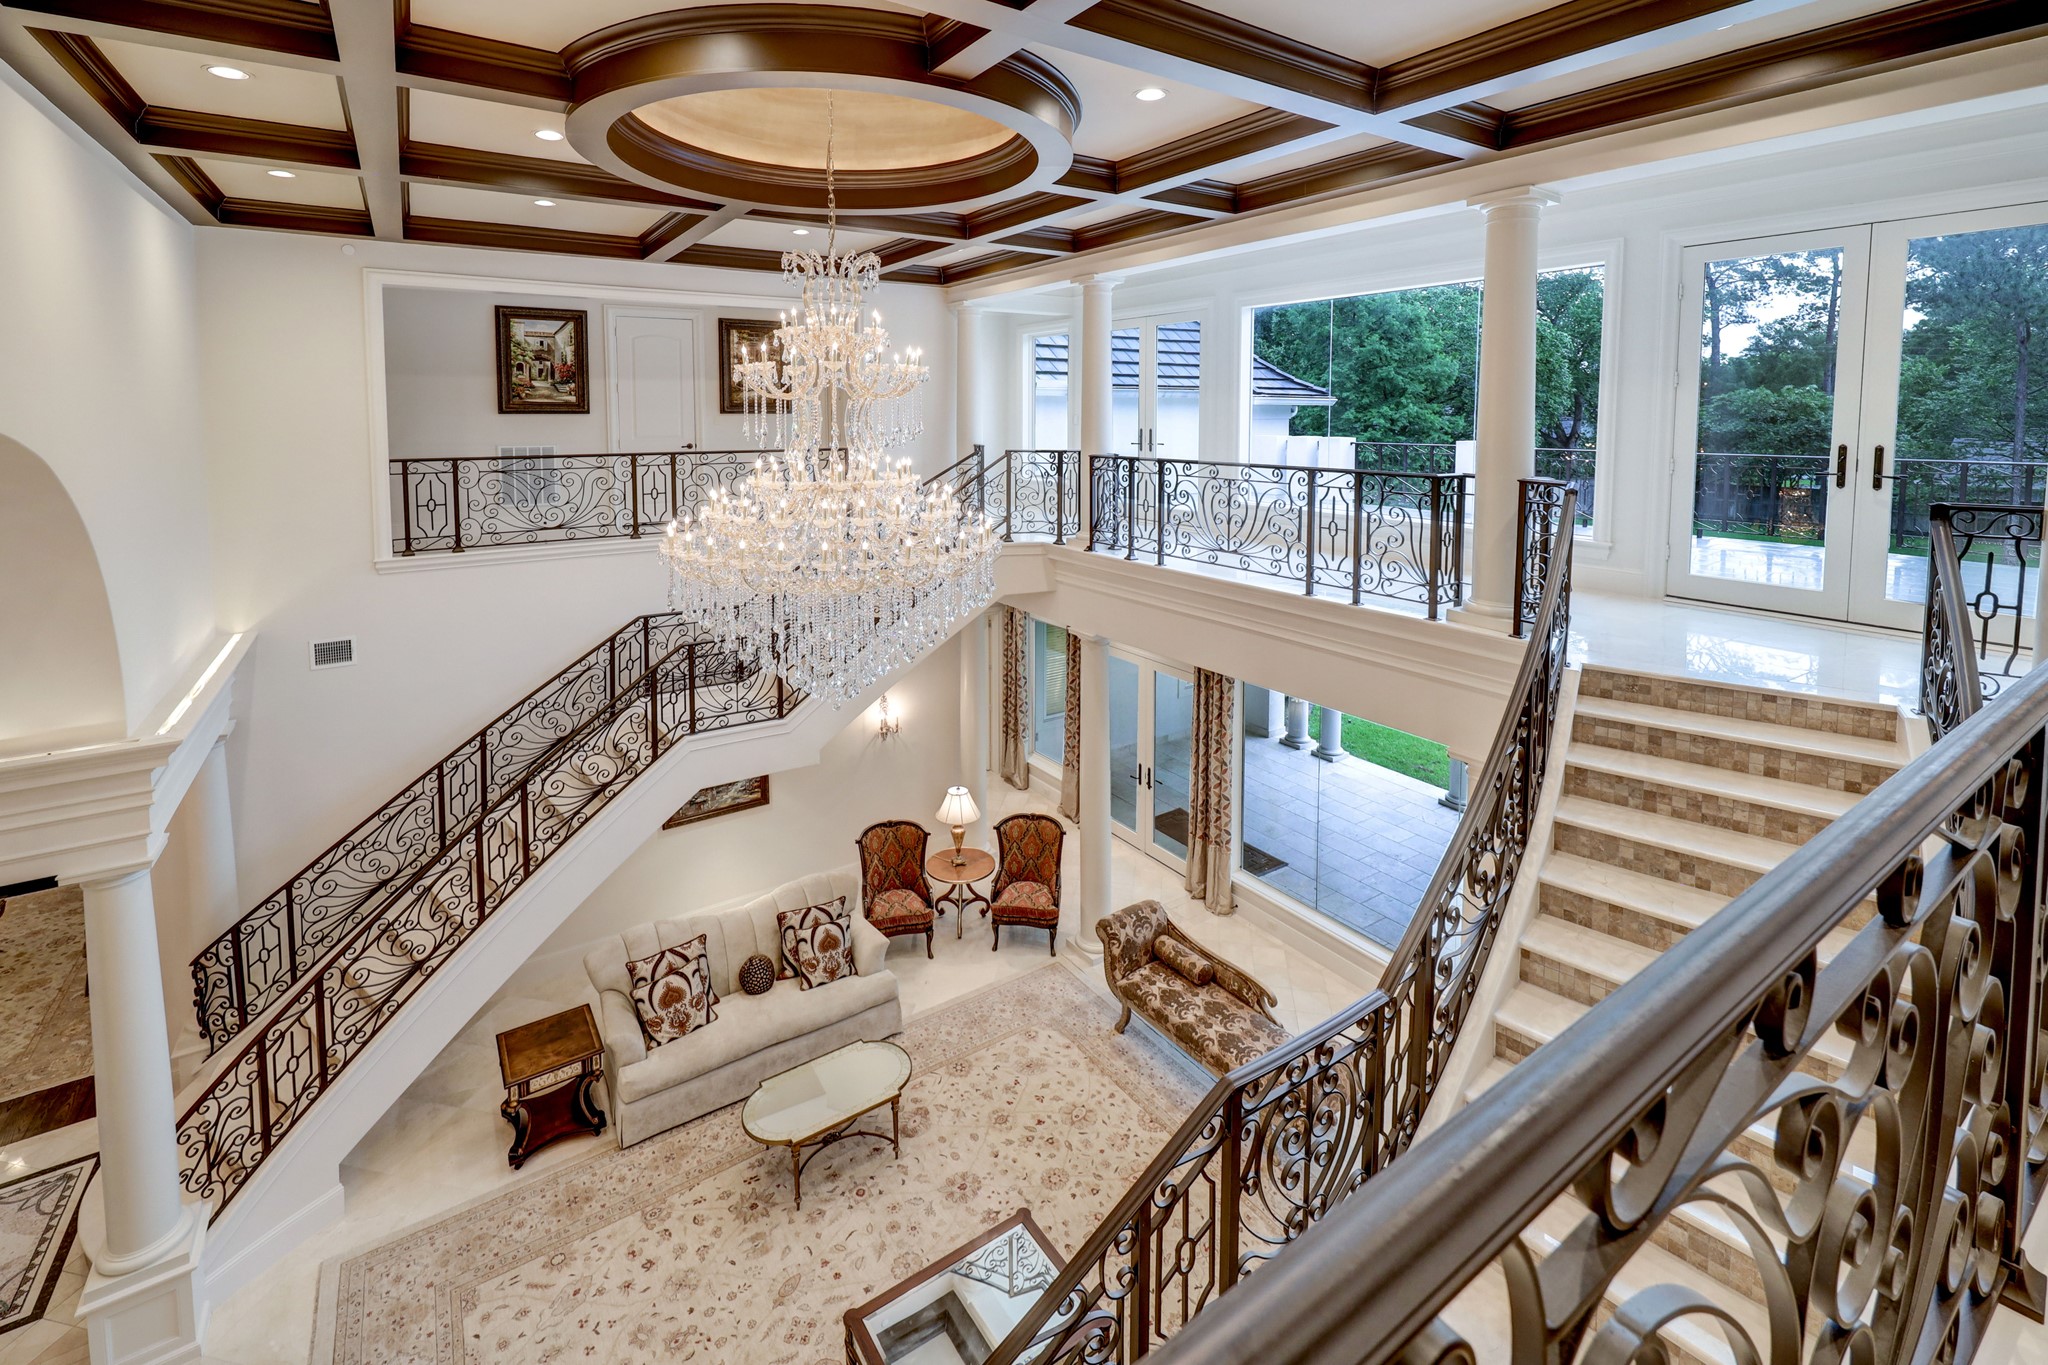 Check out the stunning views from upstairs looking into the Formal Living Room. The two-story ceiling and abundance of windows allow natural light to flood the house.